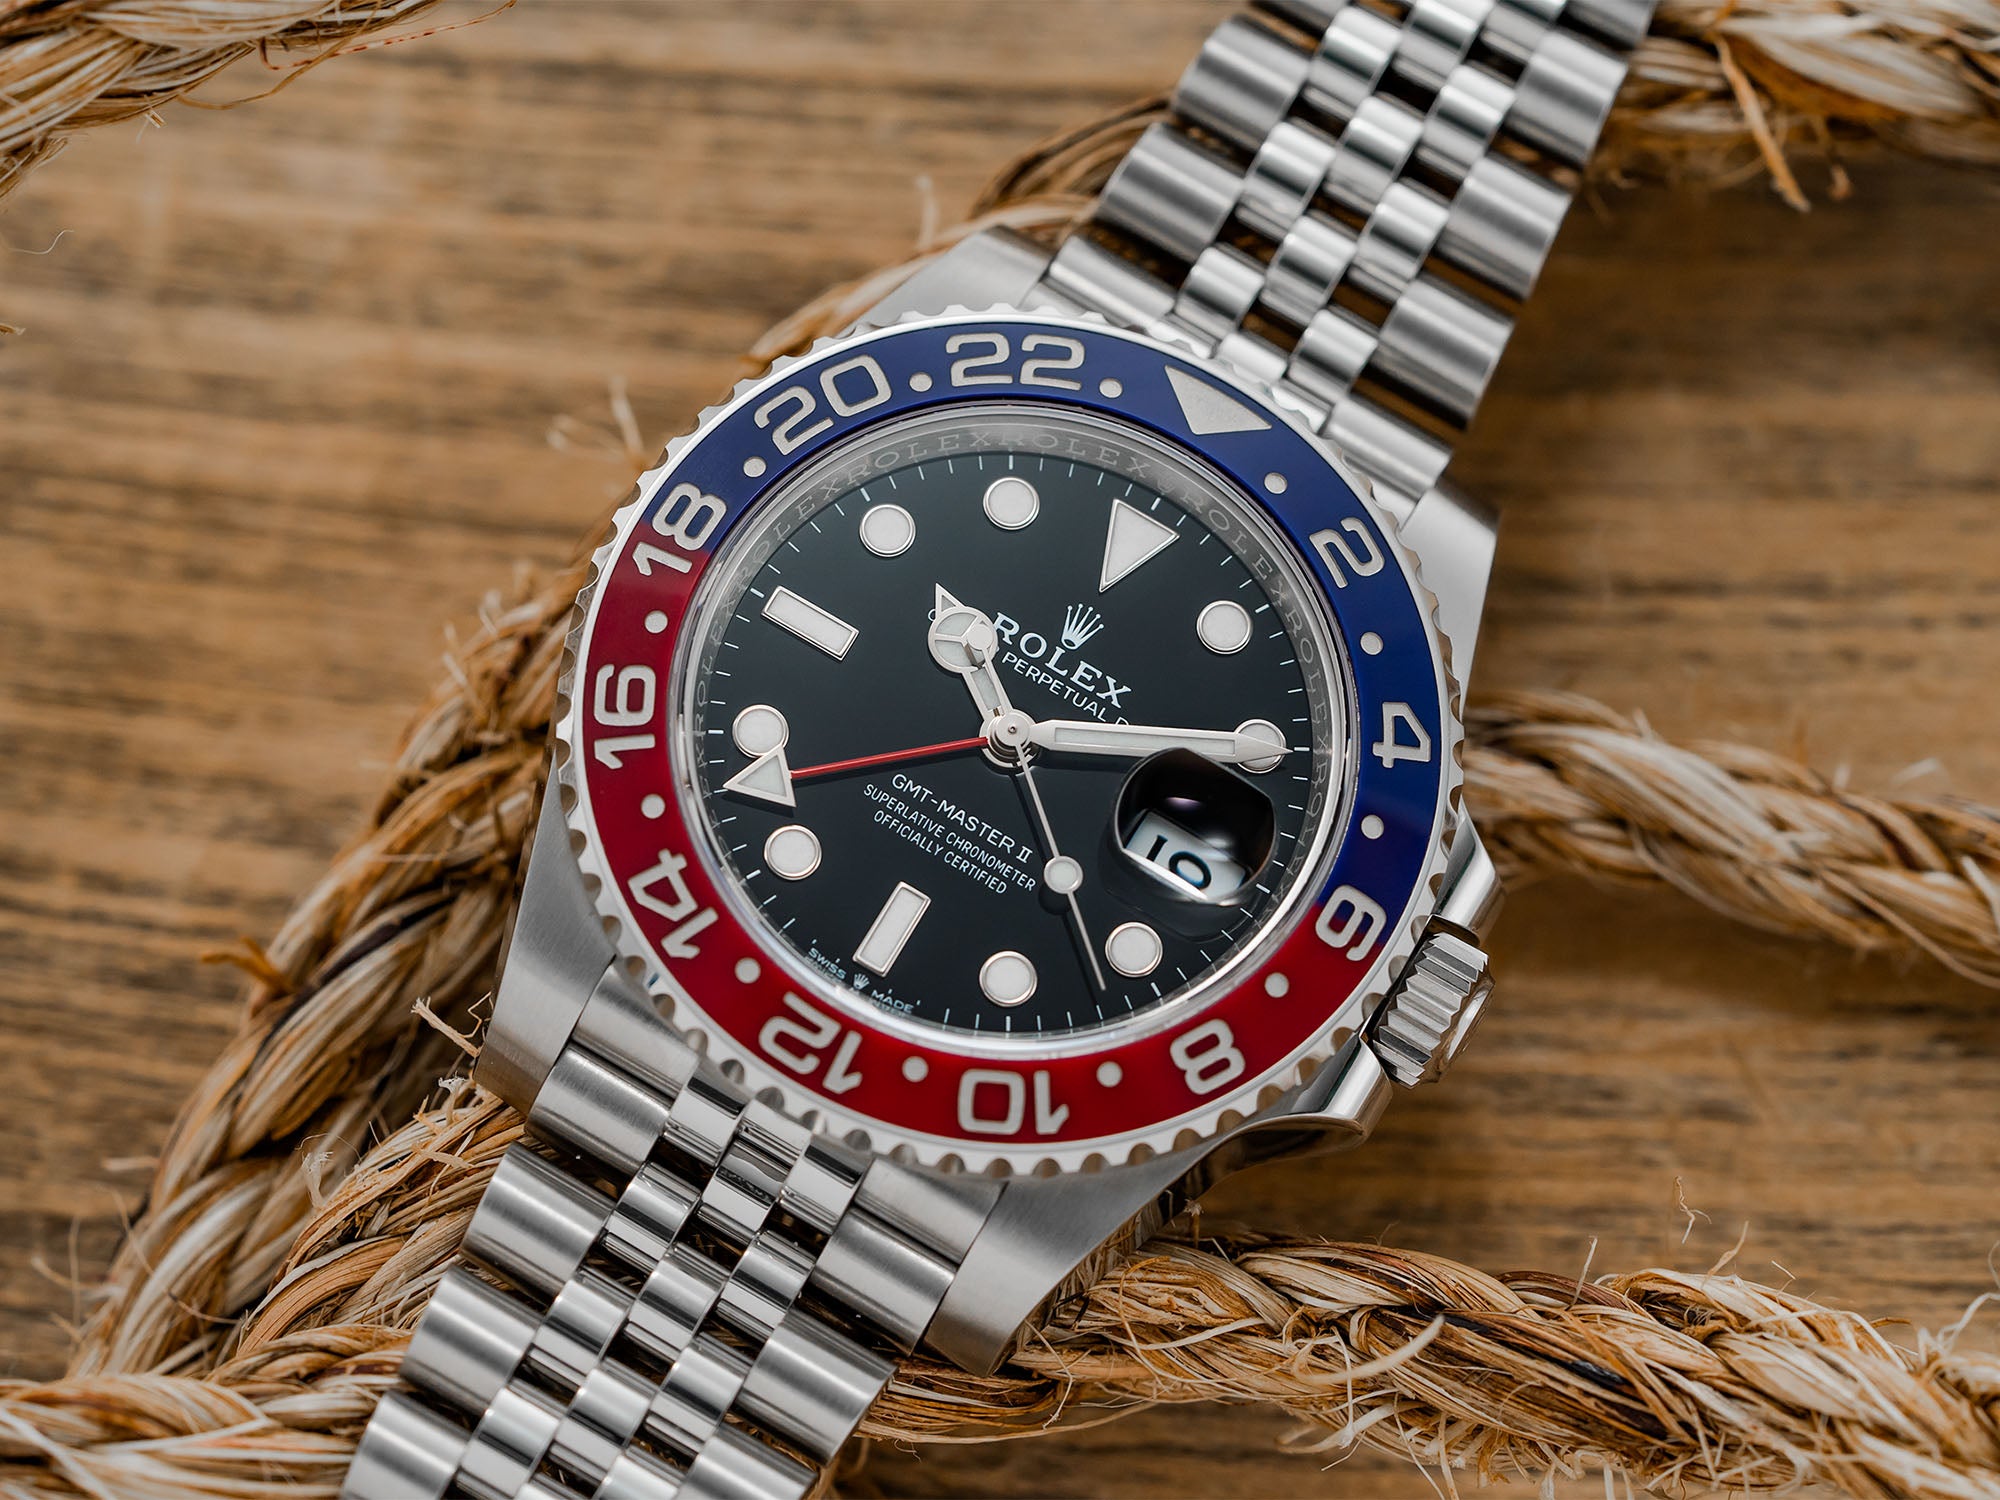 Watch Pairs: Rolex GMT-Master II & Jaeger-LeCoultre Reverso 1931